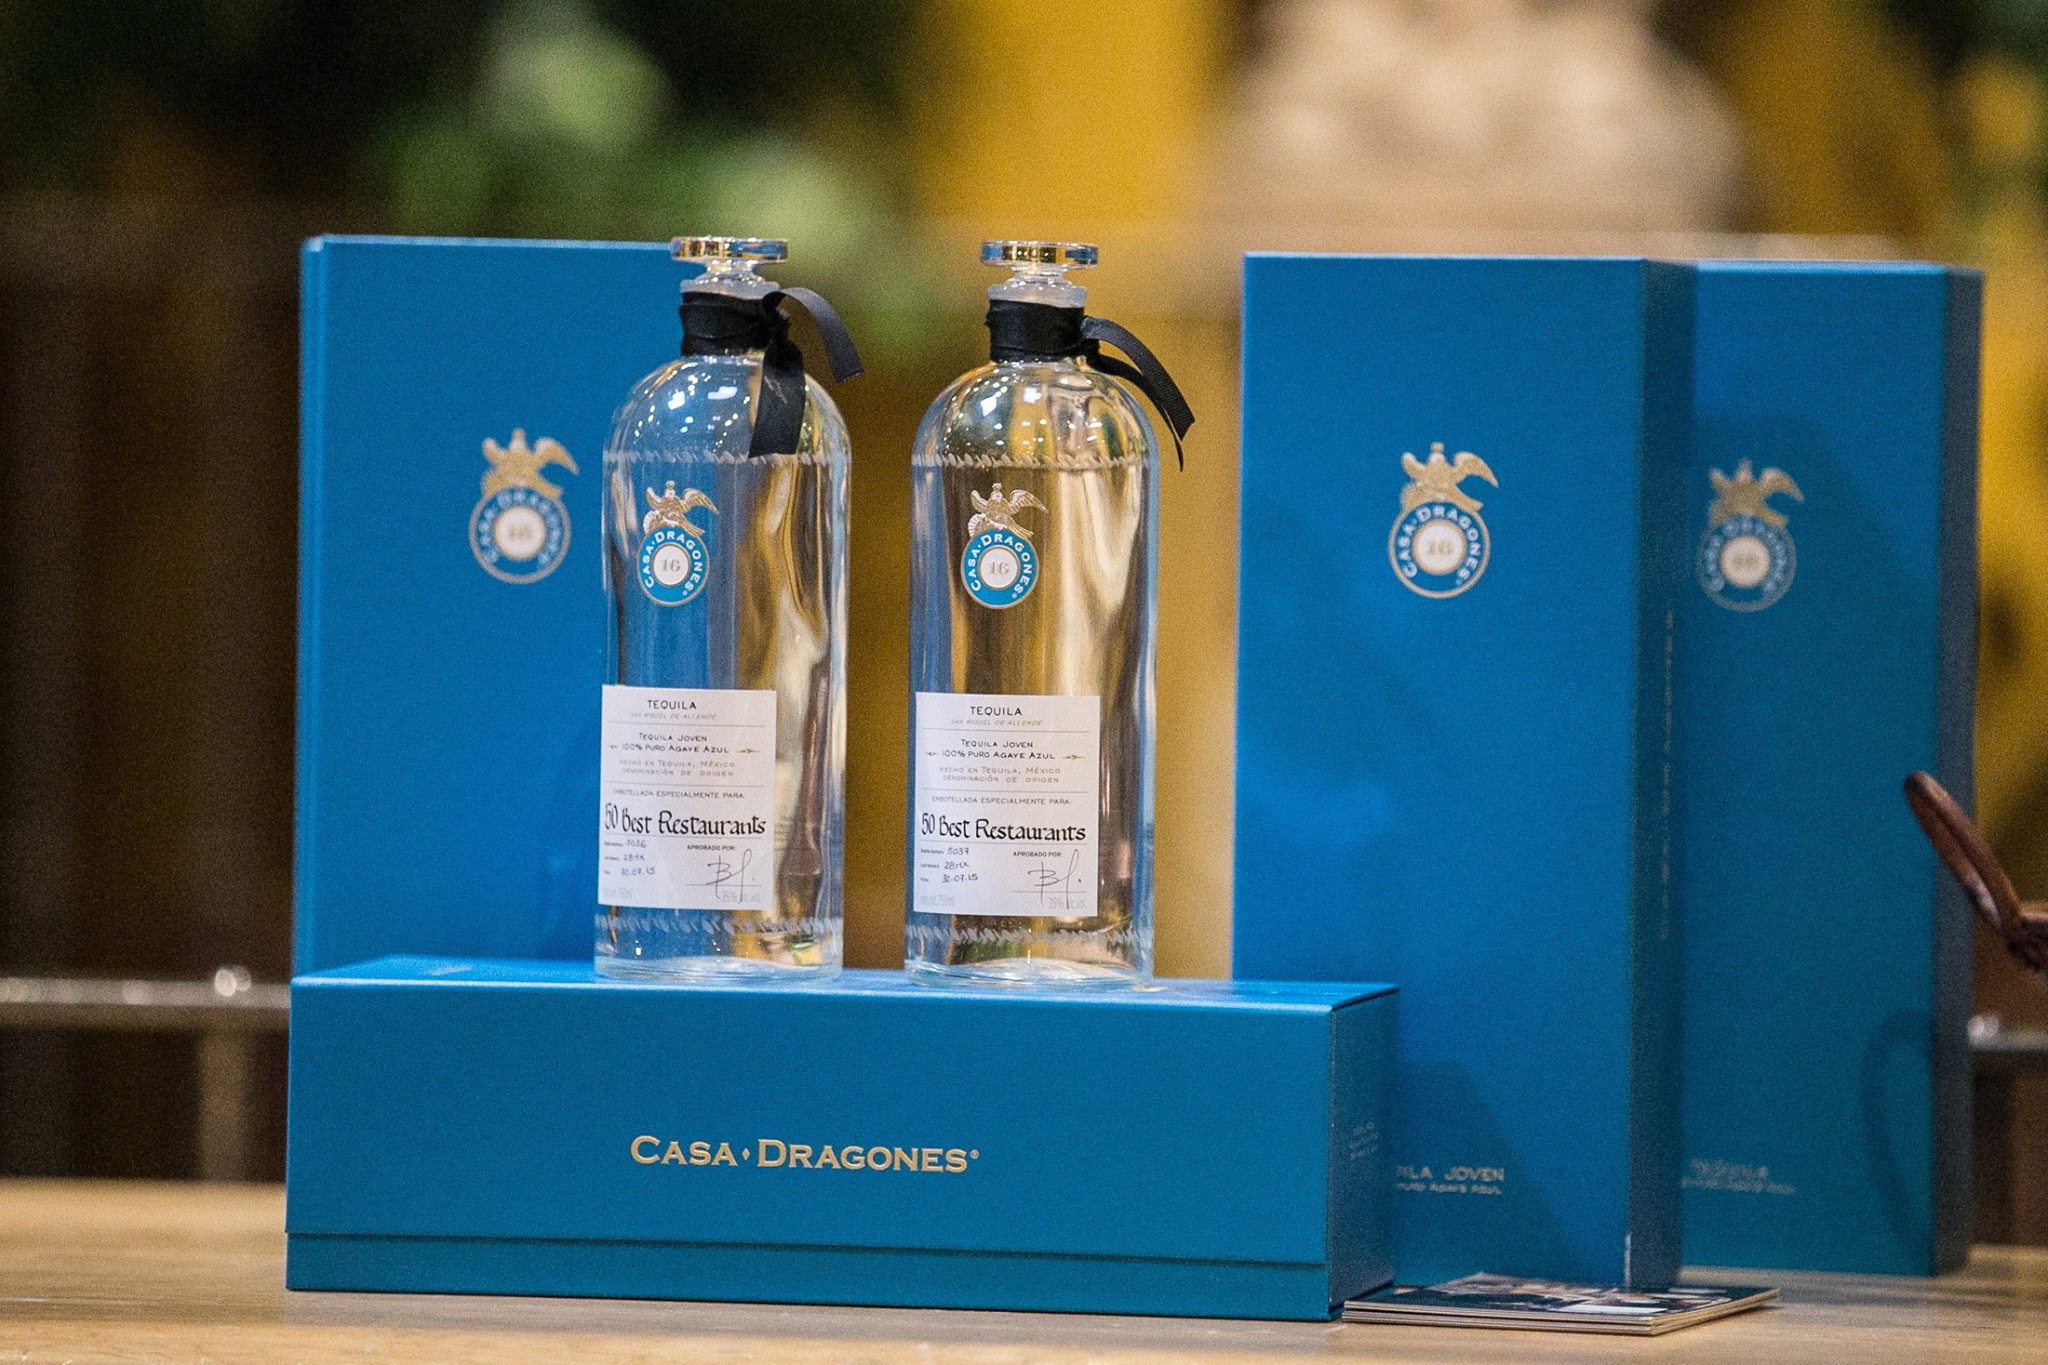 Tequila Casa Dragones Joven: small batch, 100% Pure Blue Agave sipping tequilas, crafted in Mexico with meticulous attention to detail. Taste the difference!